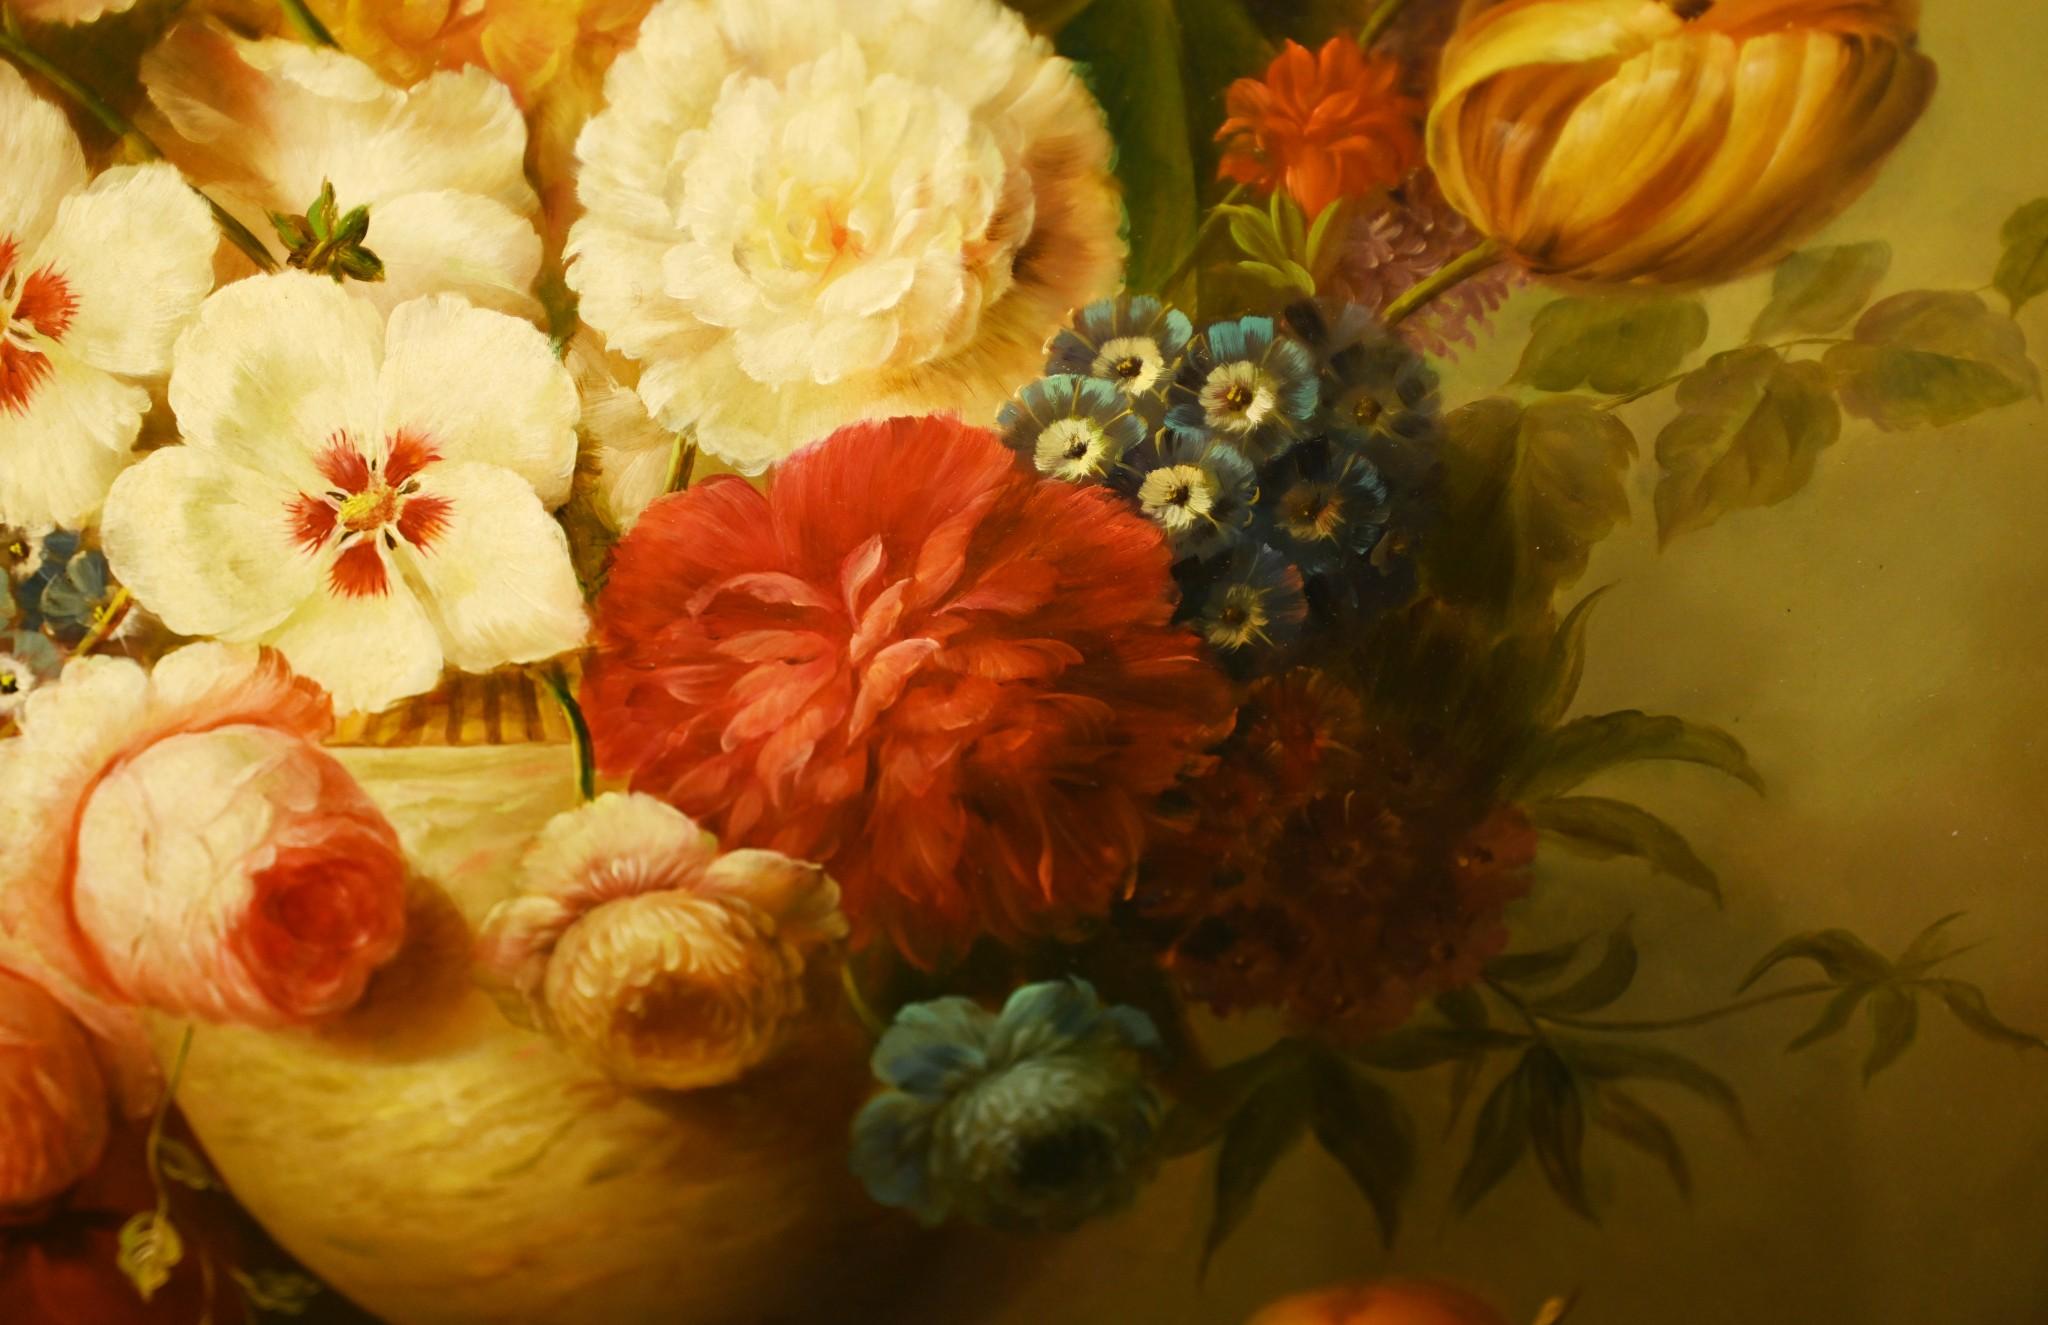 Canvas Dutch Floral Still Life Oil Painting Signed Art For Sale